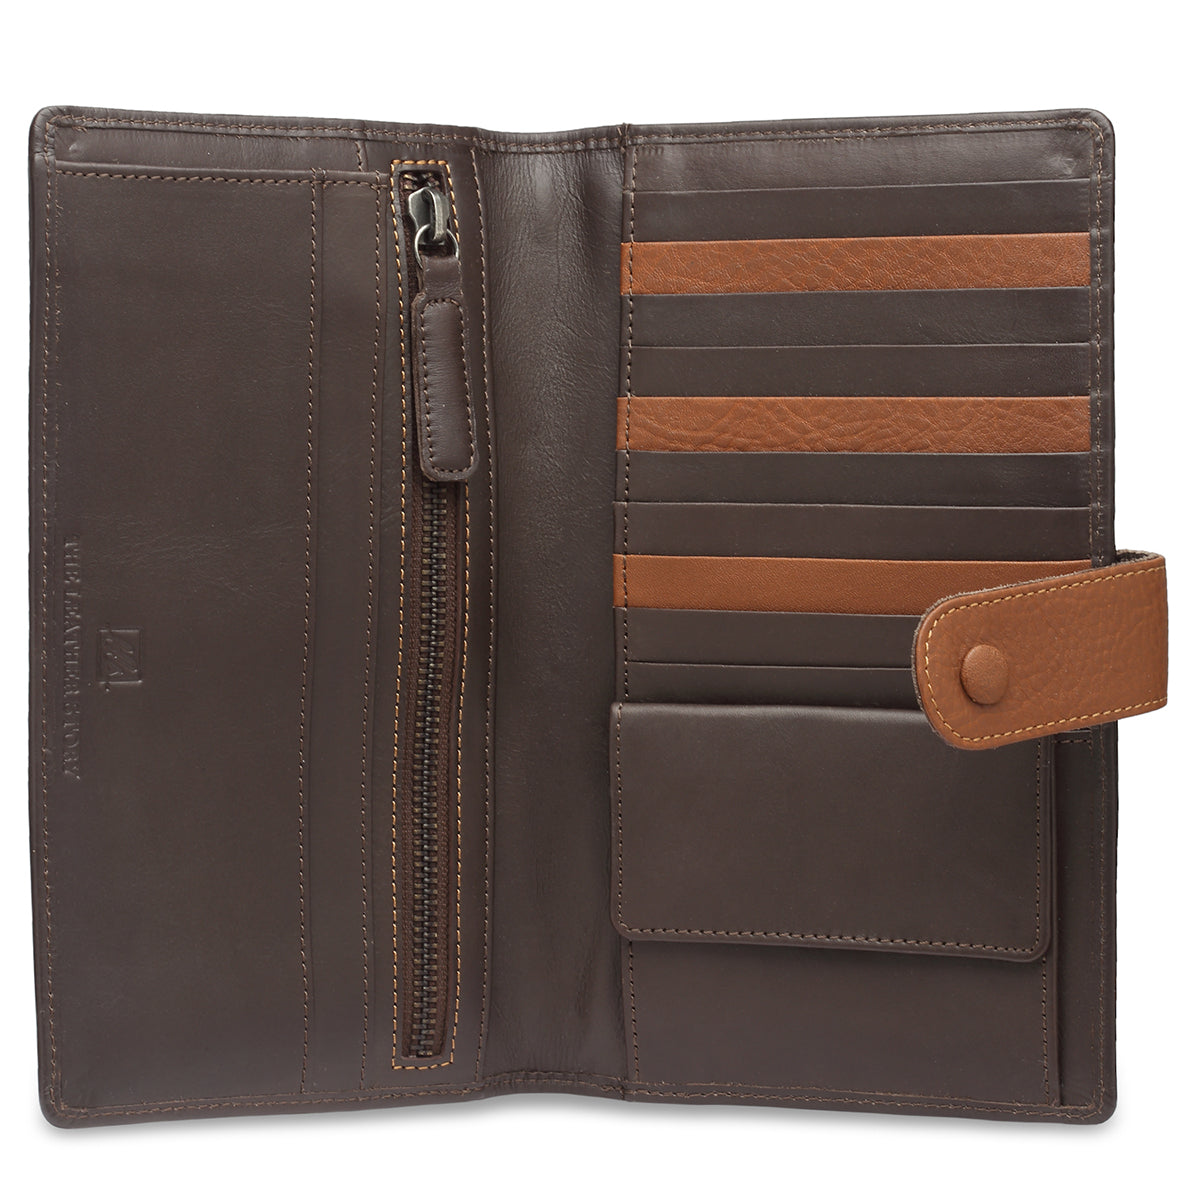 Classic travel Wallet with Luggage Tag